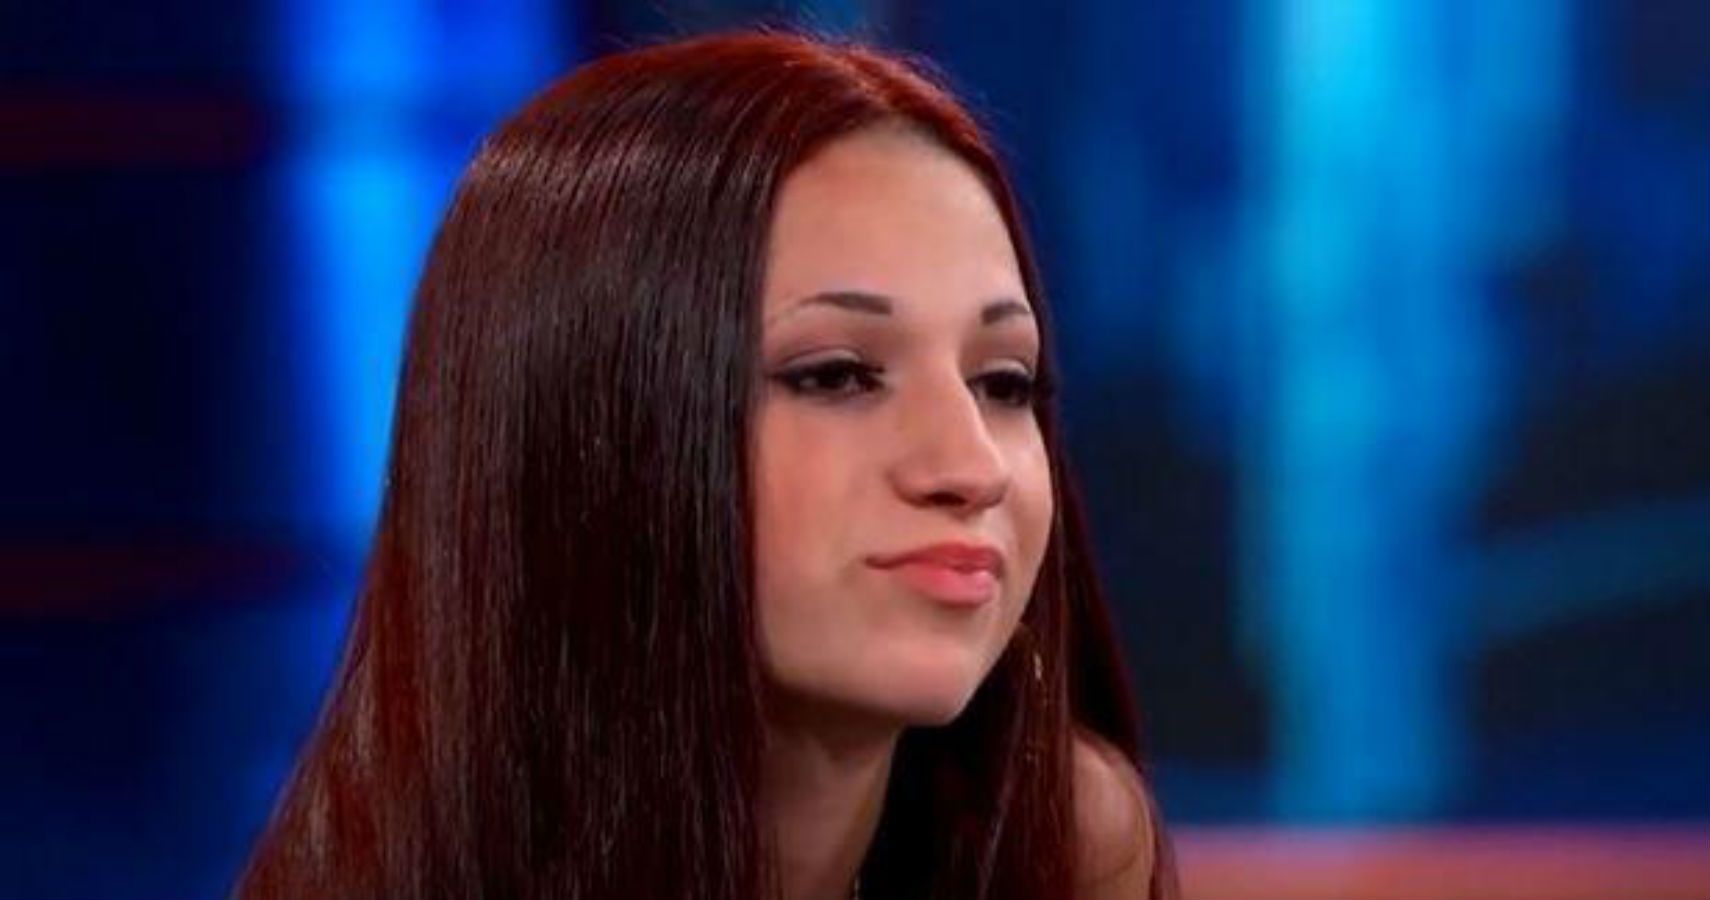 Cash Me Outside Girl To Get Reality Show